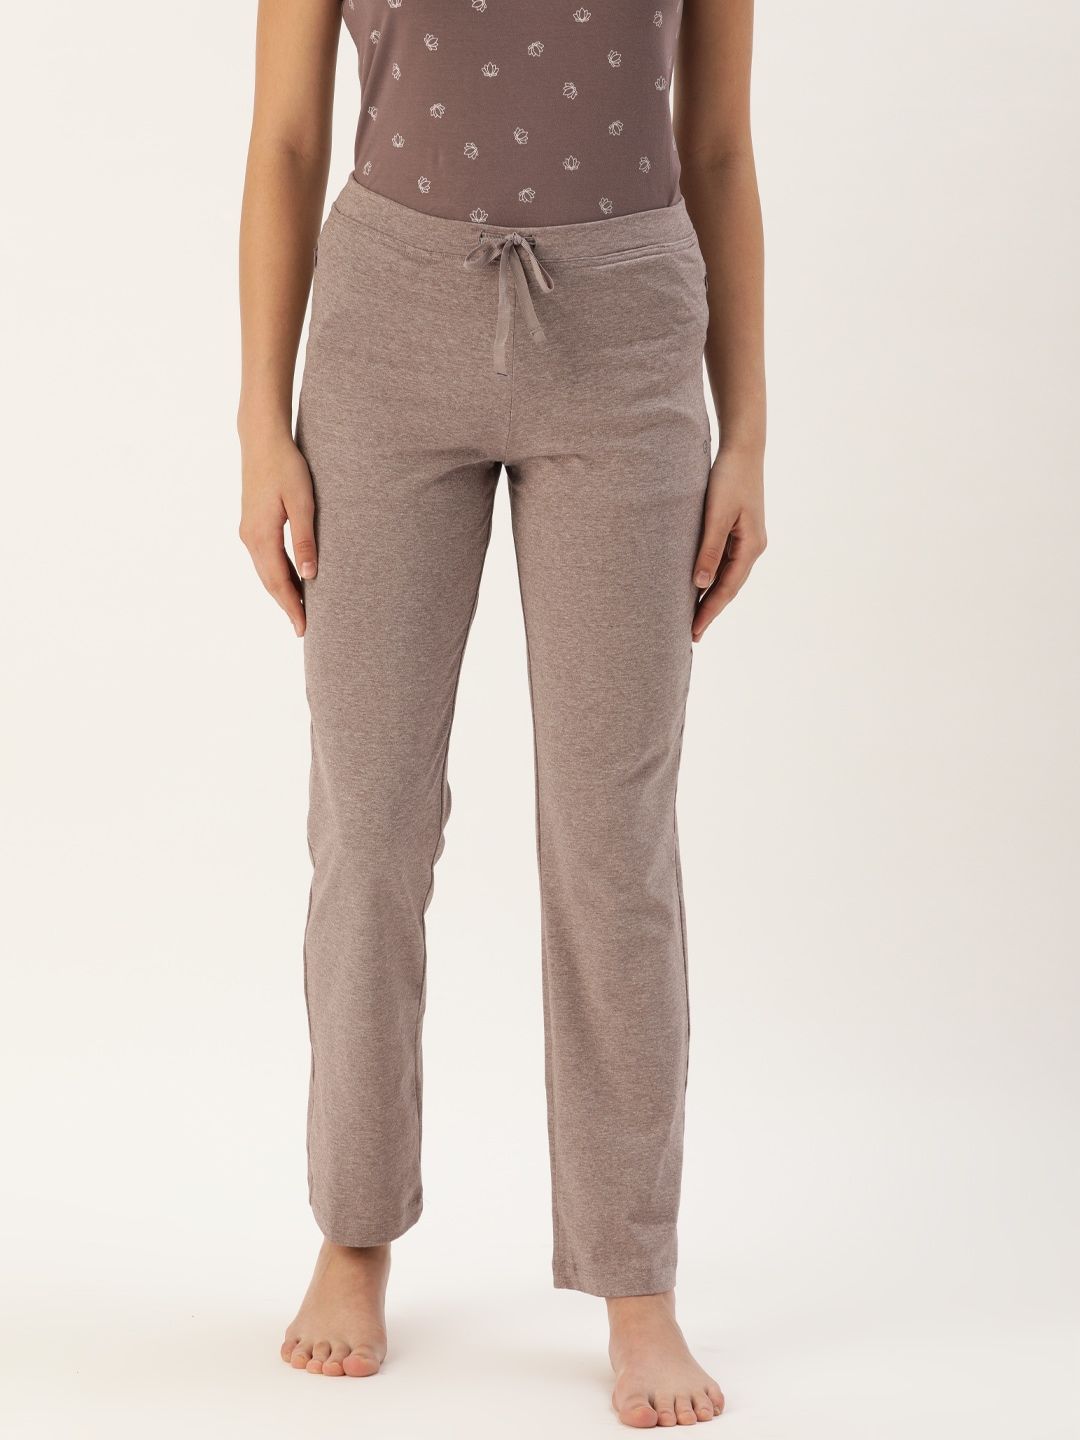 Enamor Women Taupe Slim Fit Pull on Lounge Pants Price in India